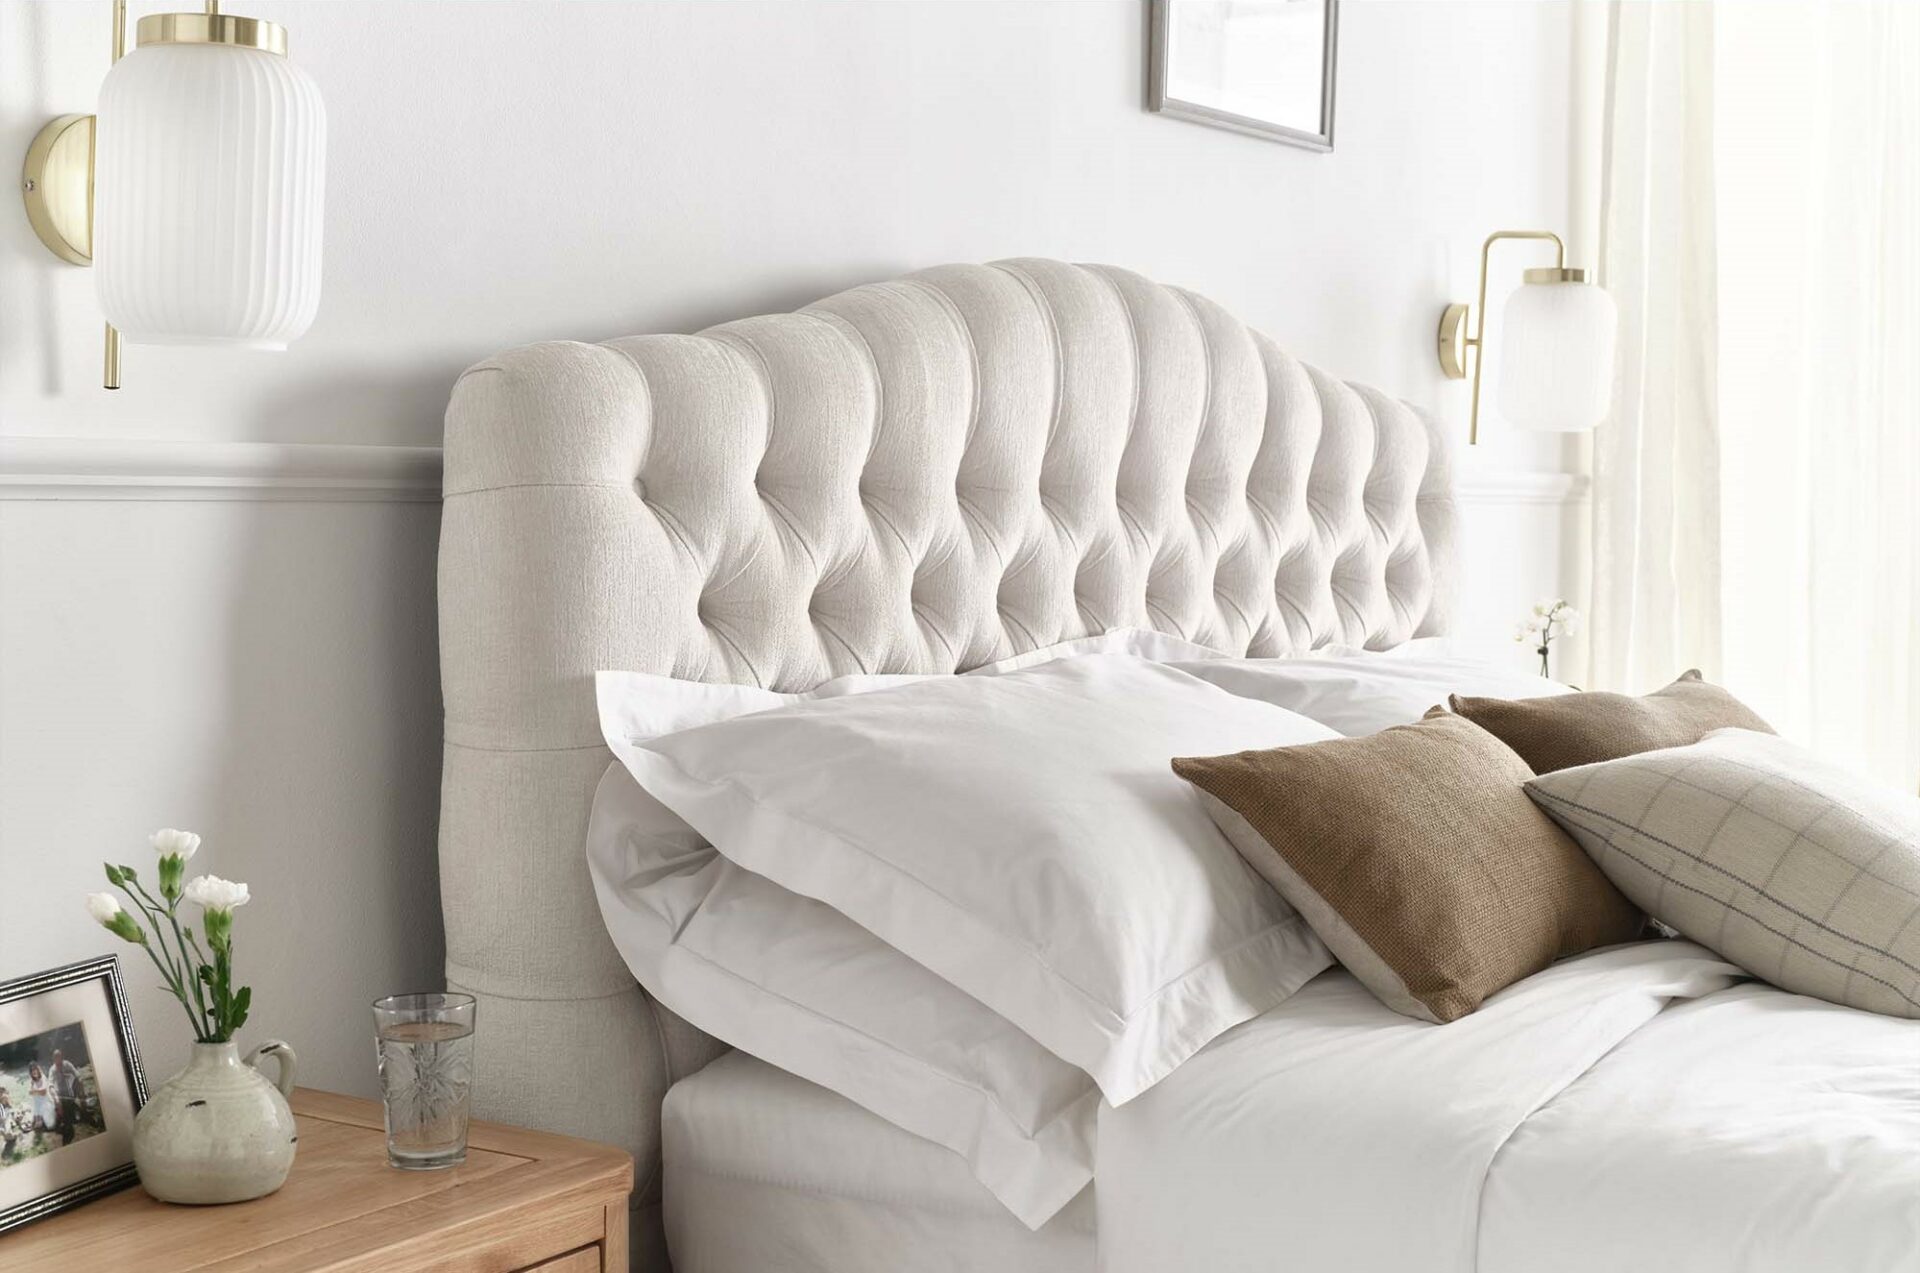 Pale grey Chesterfield-style upholstered bed with brown cushions and gold and white bedside wall lights.